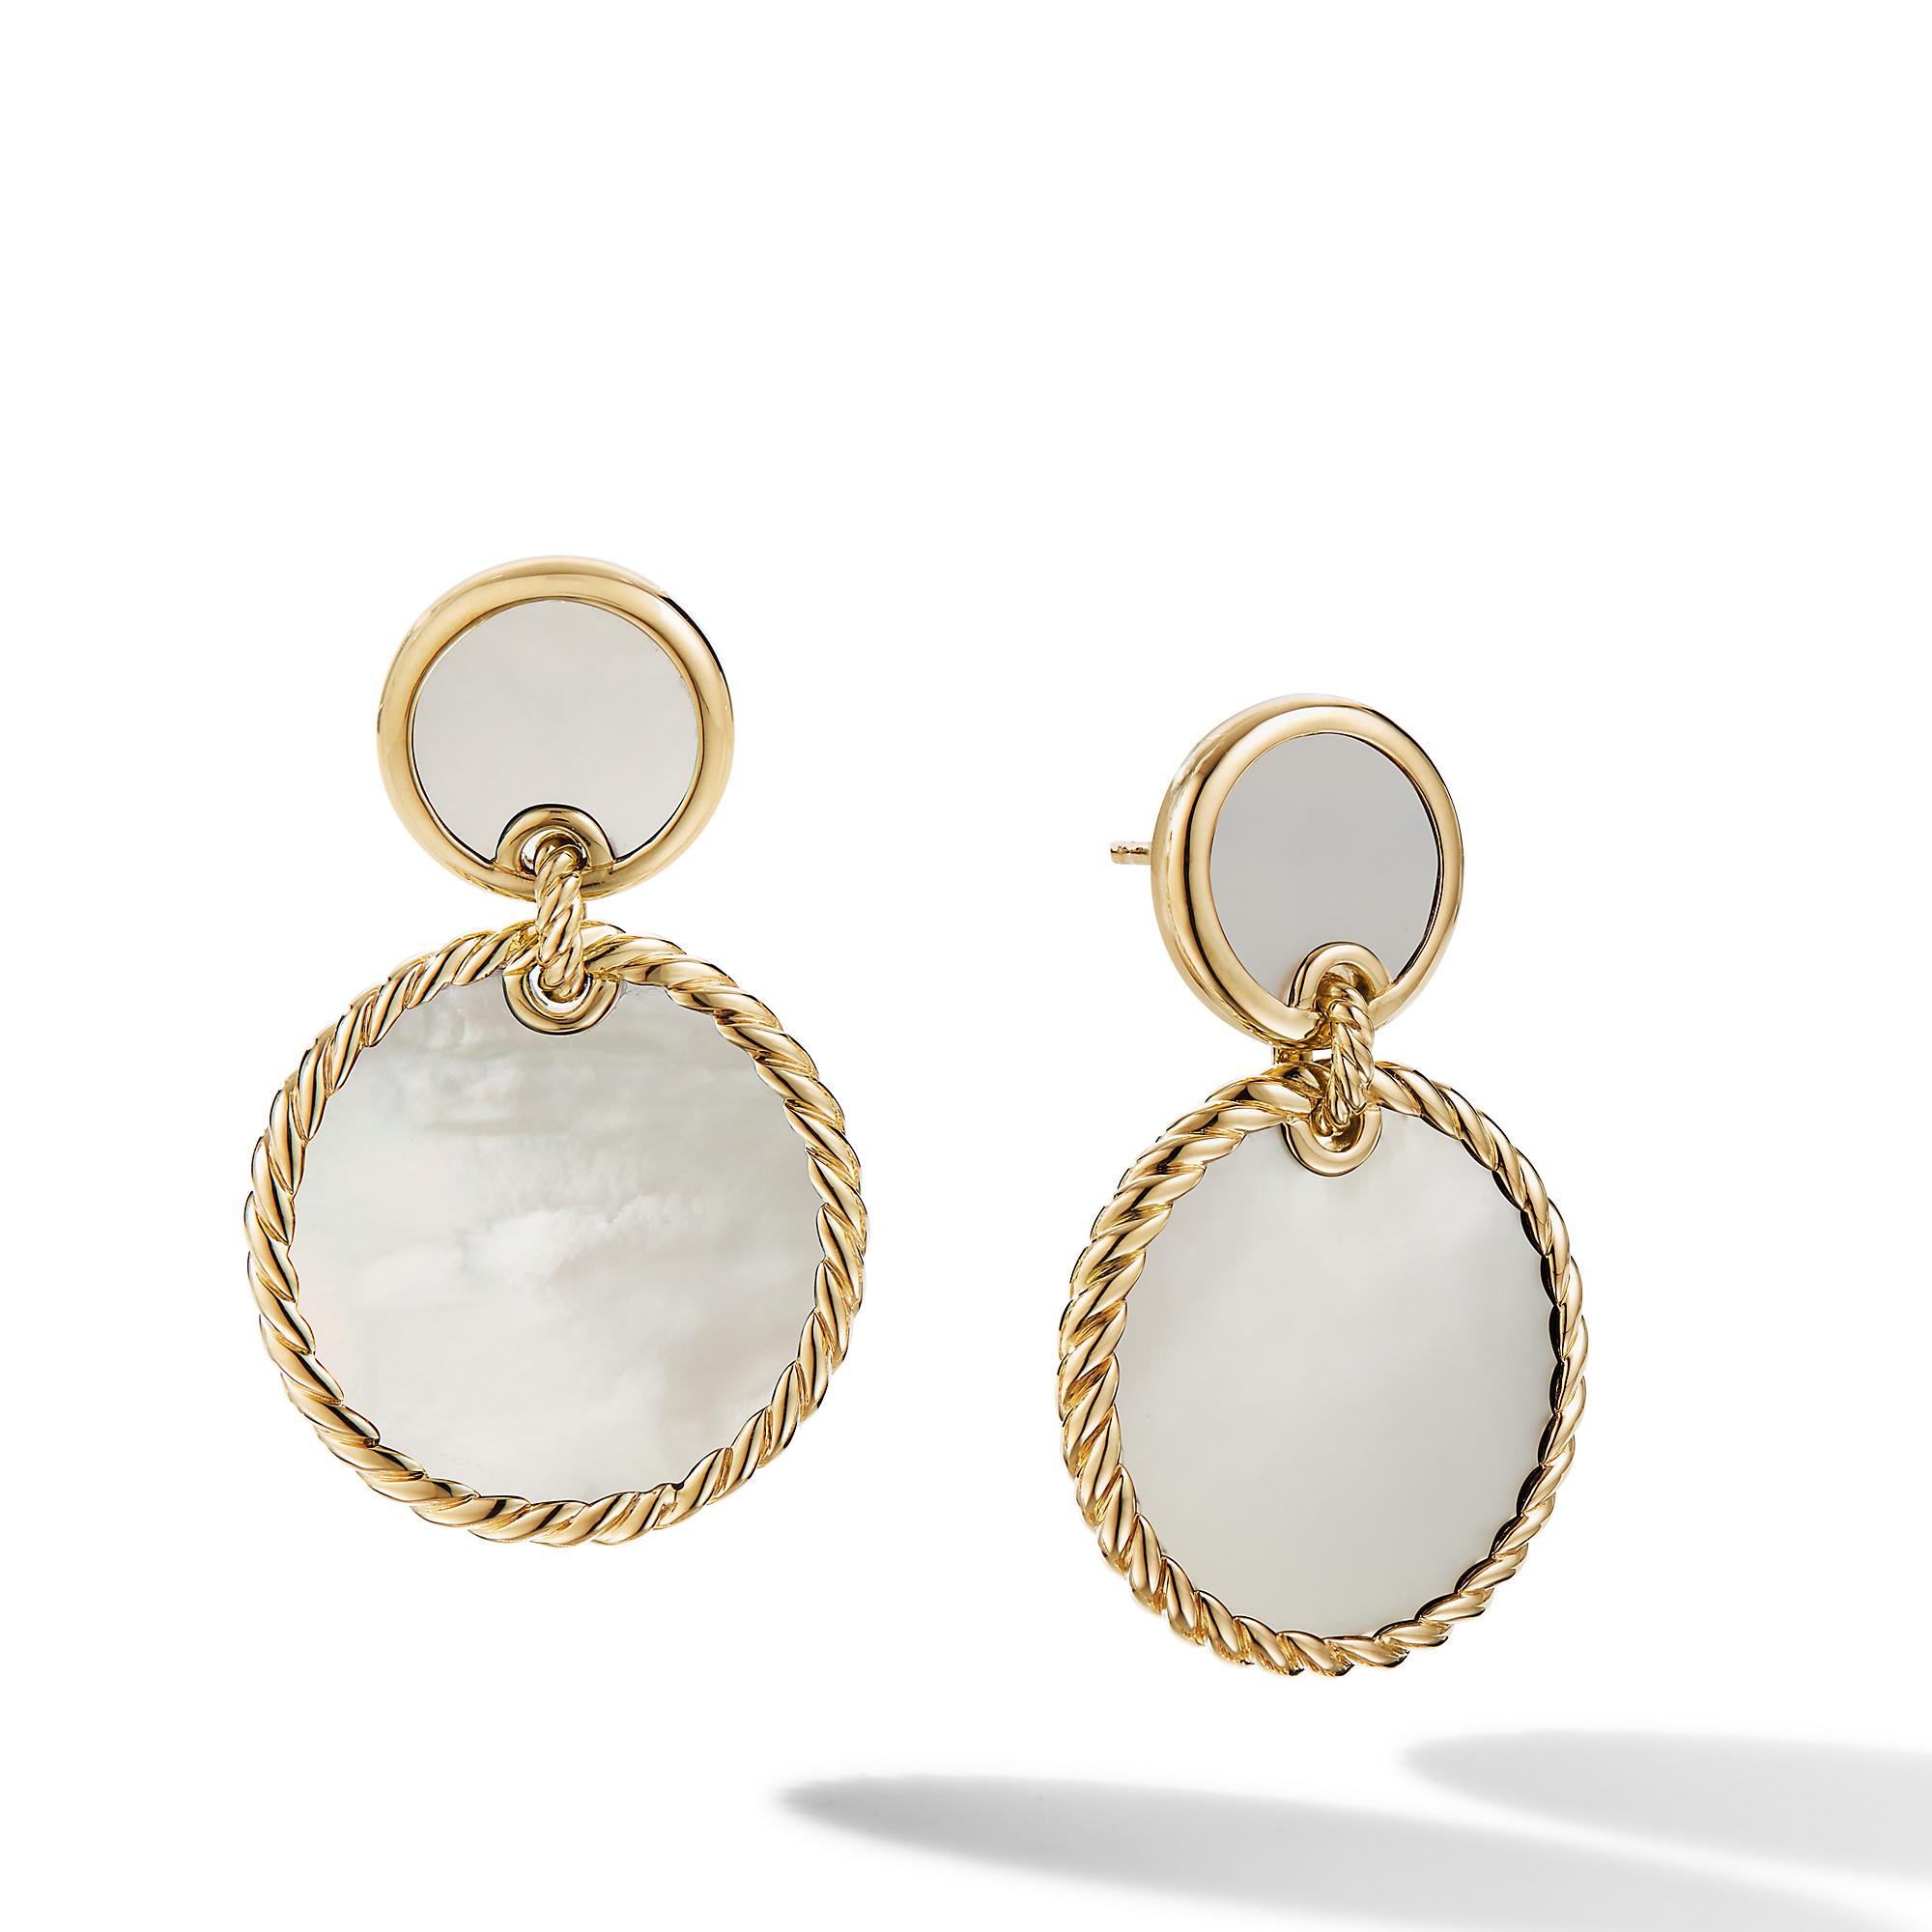 David Yurman DY Elements Double Drop Earrings in 18K Yellow Gold with Mother of Pearl